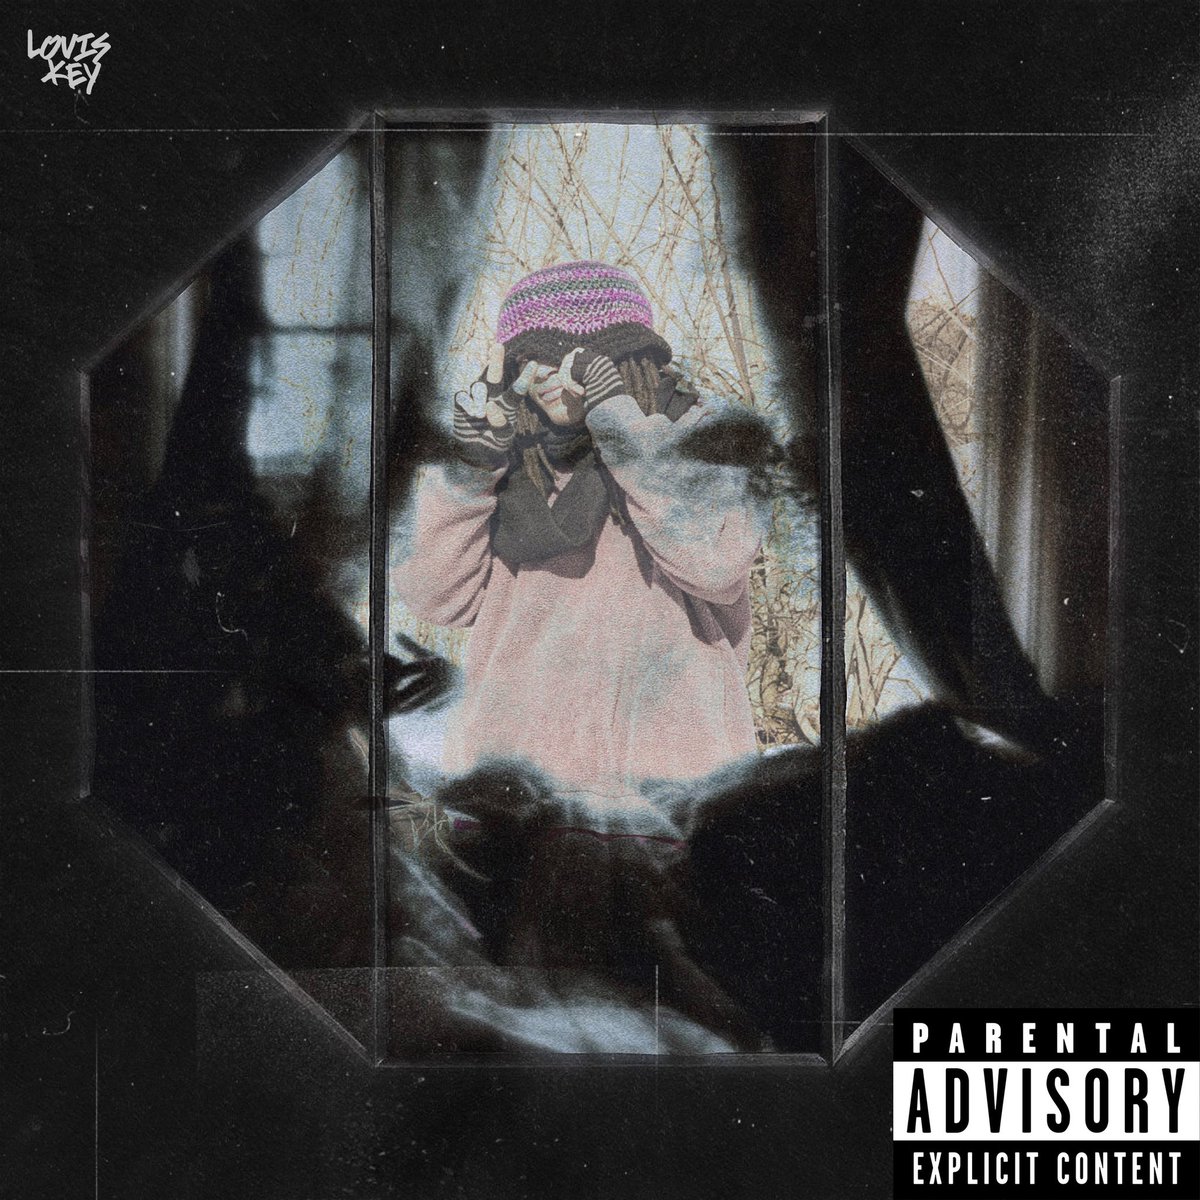 The Villain Tape 😈 Available: MARCH 29th 2024 #G00DFRIDAY ! * Pre-save link 🔗 in bio #N3Wmusic #Music #like #louiskey #mar29 #goodfriday #new #hiphop #listen #explore #mixtape #newmixtape #thevillaintape #daytonmusic #ohio #LOUIE